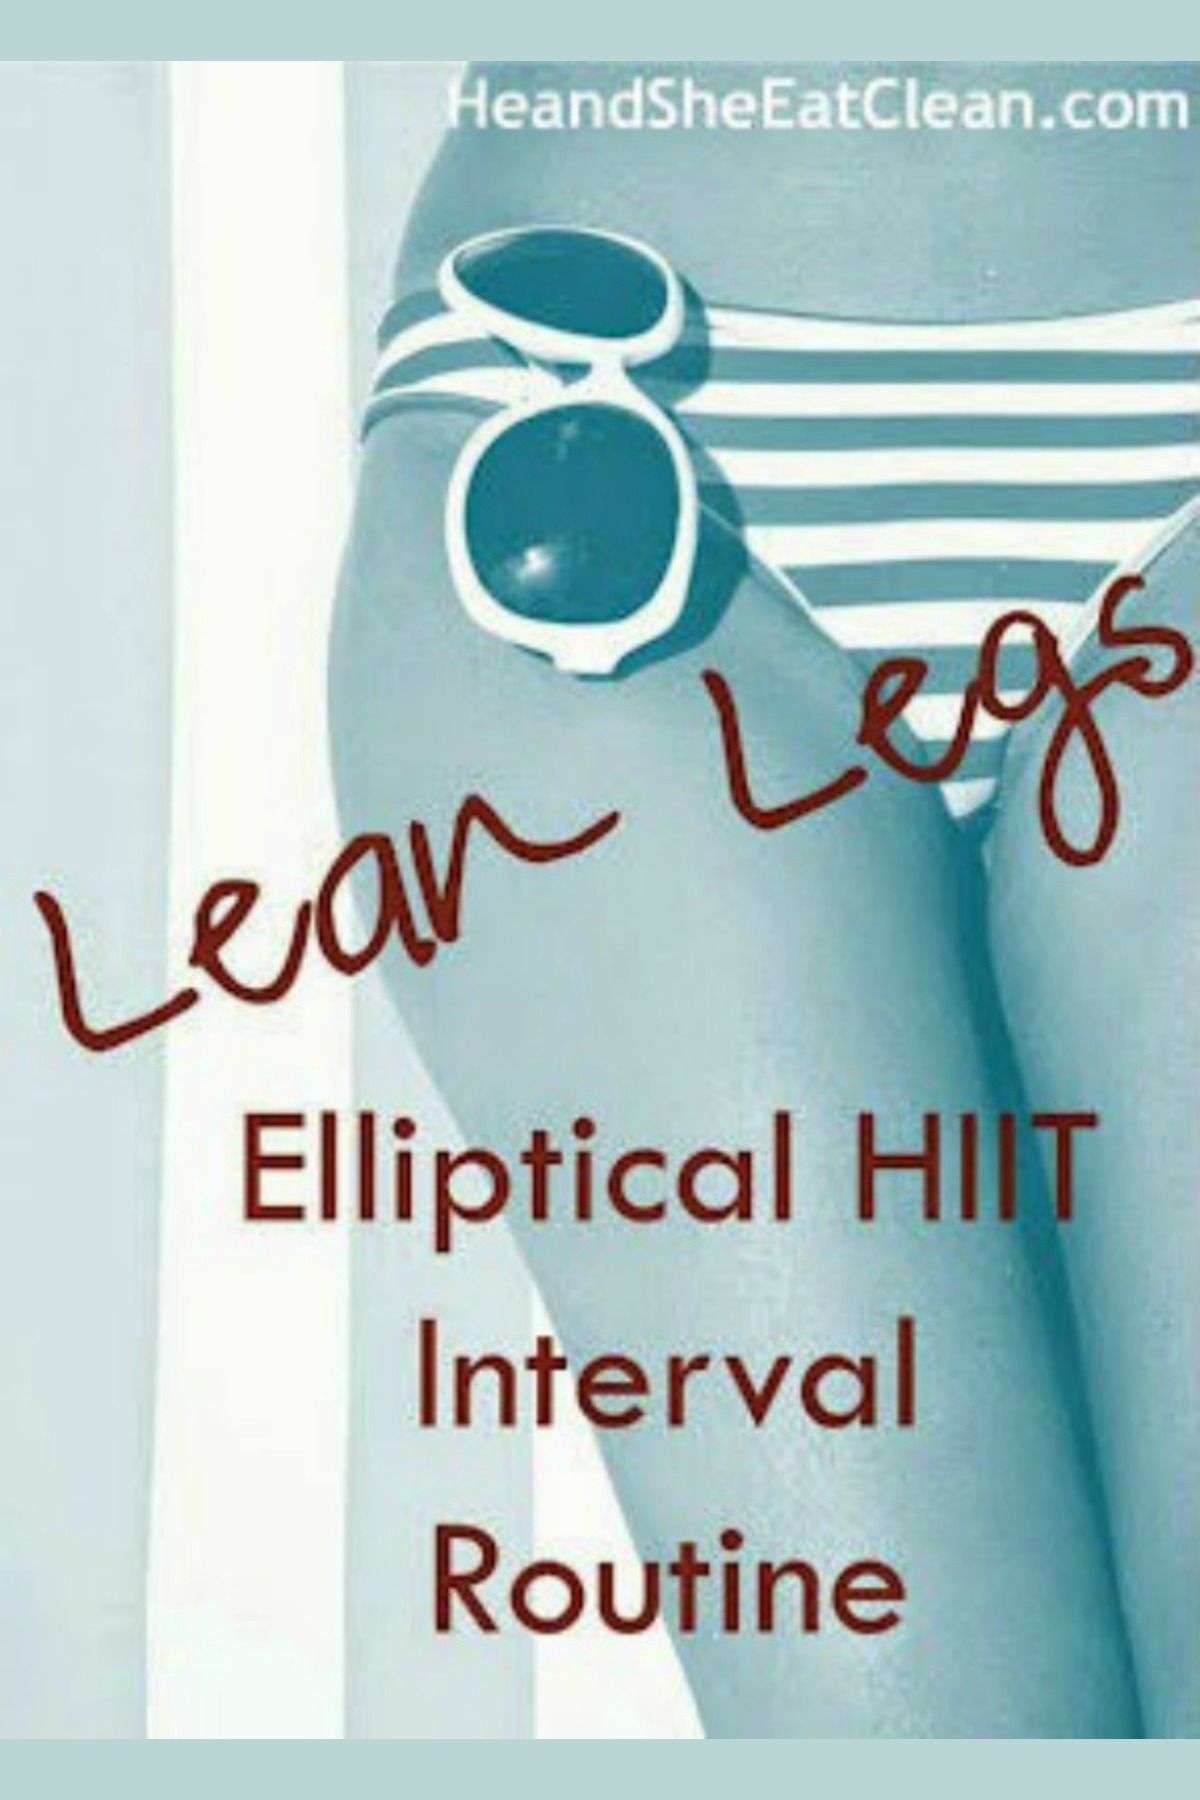 lady in a bikini with text that reads Lean Legs Elliptical HIIT Interval